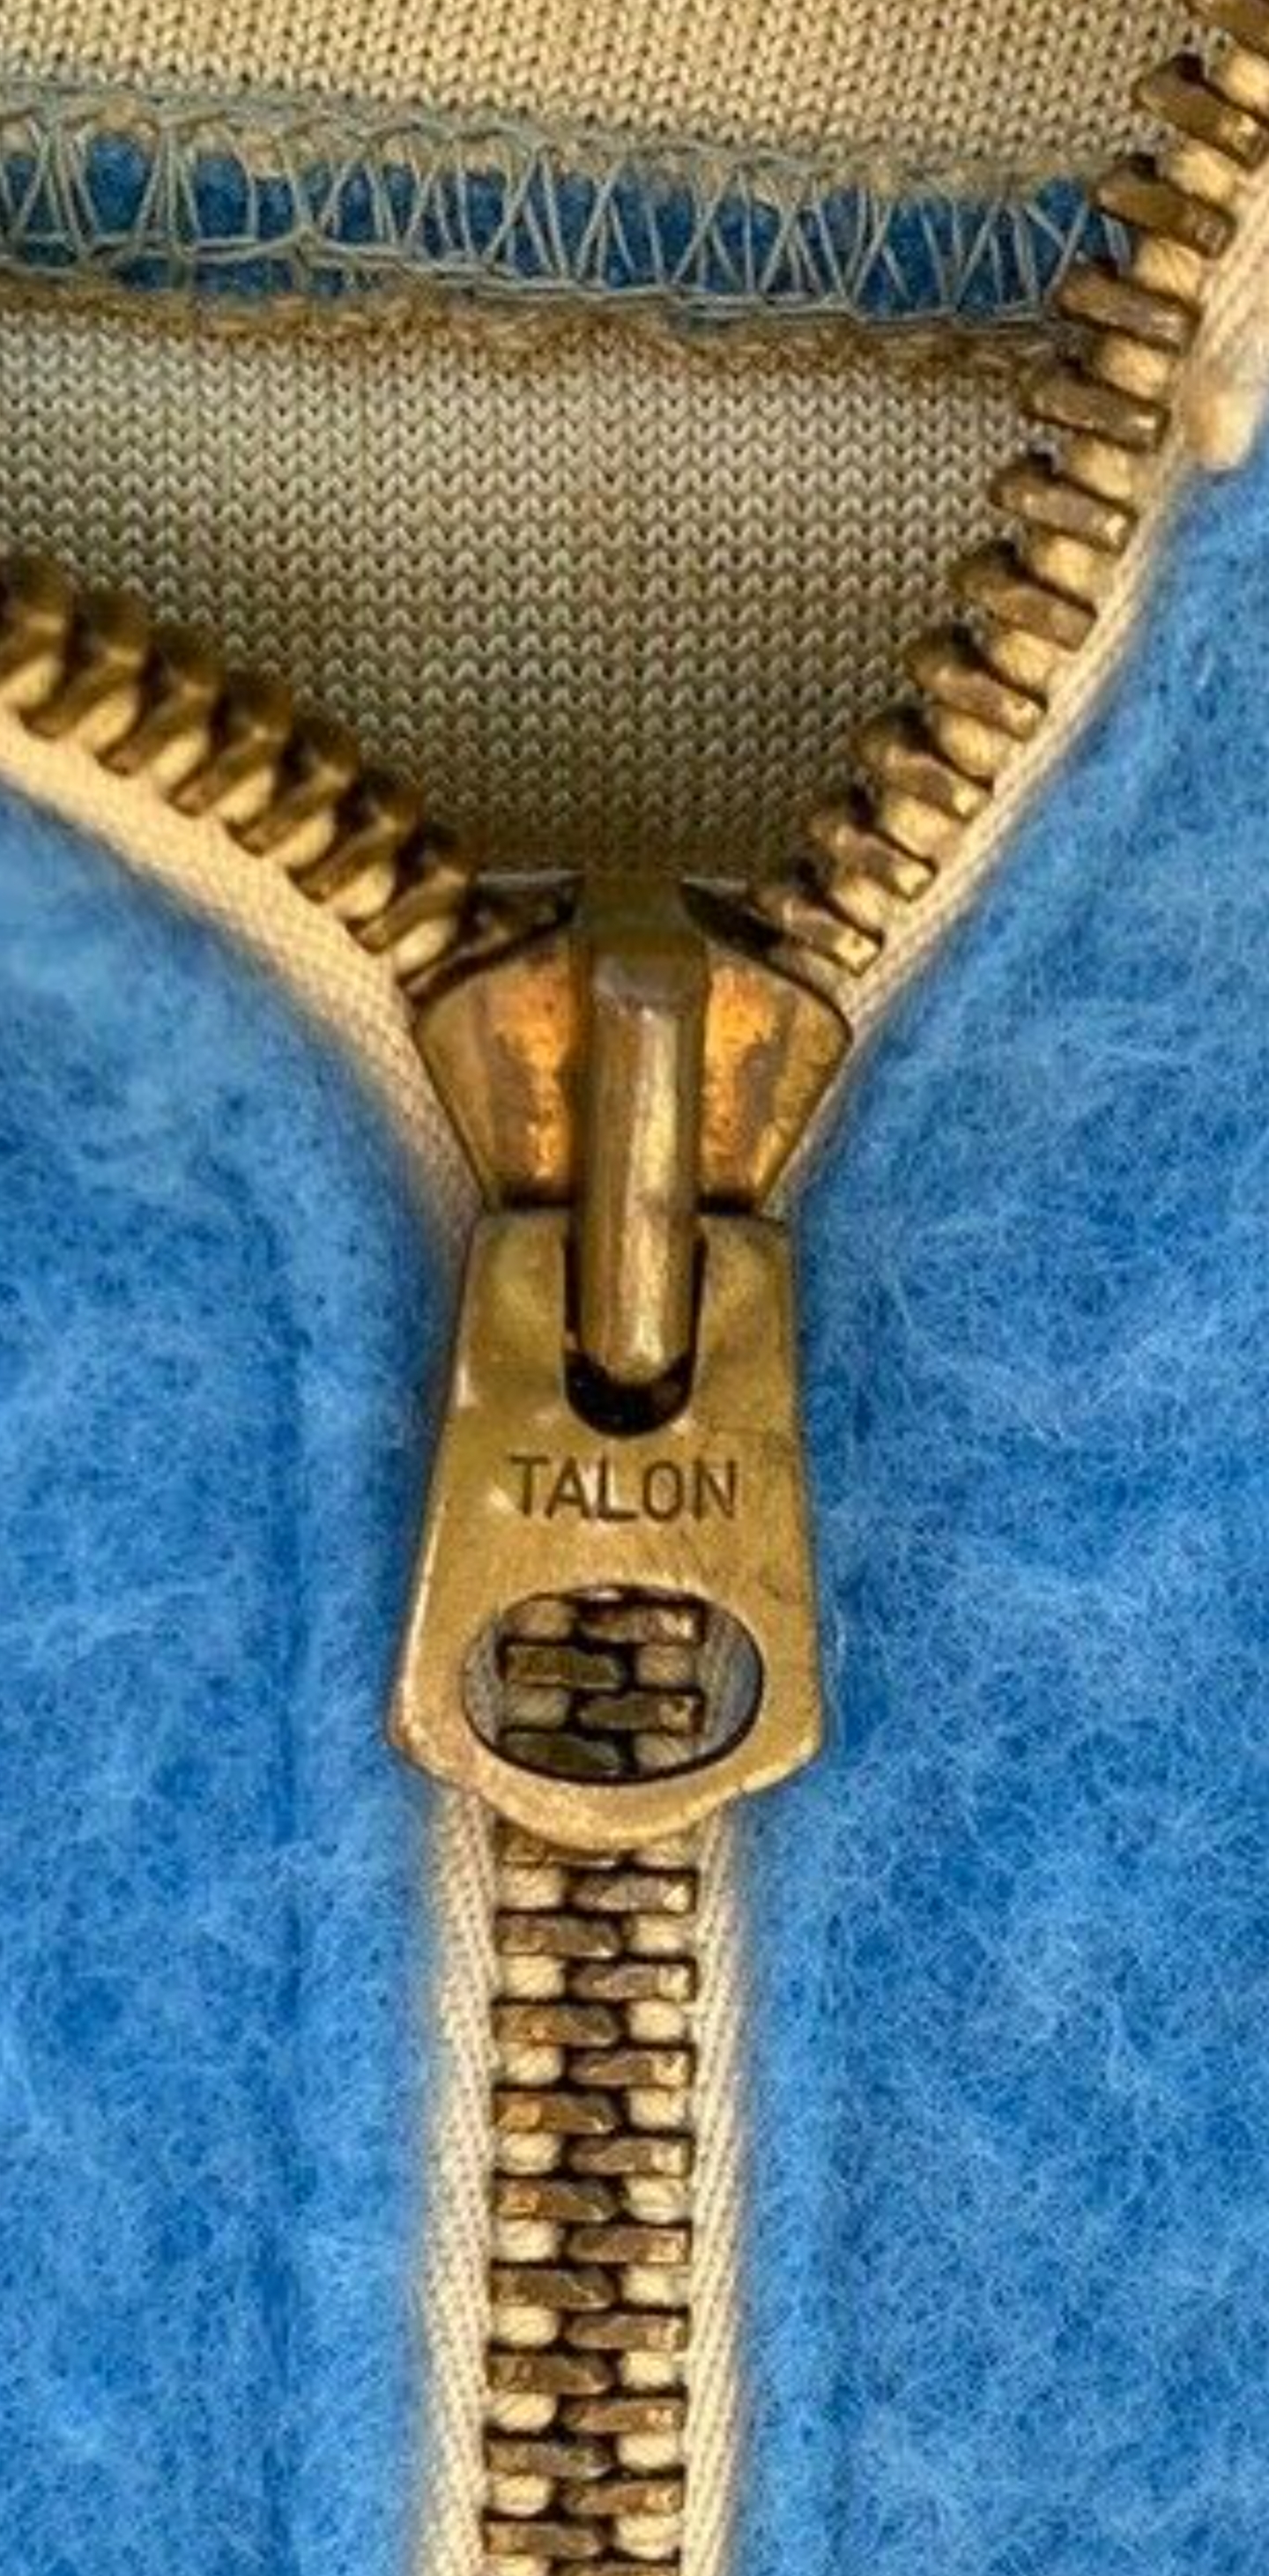 Looking for 50s Talon zip or puller only